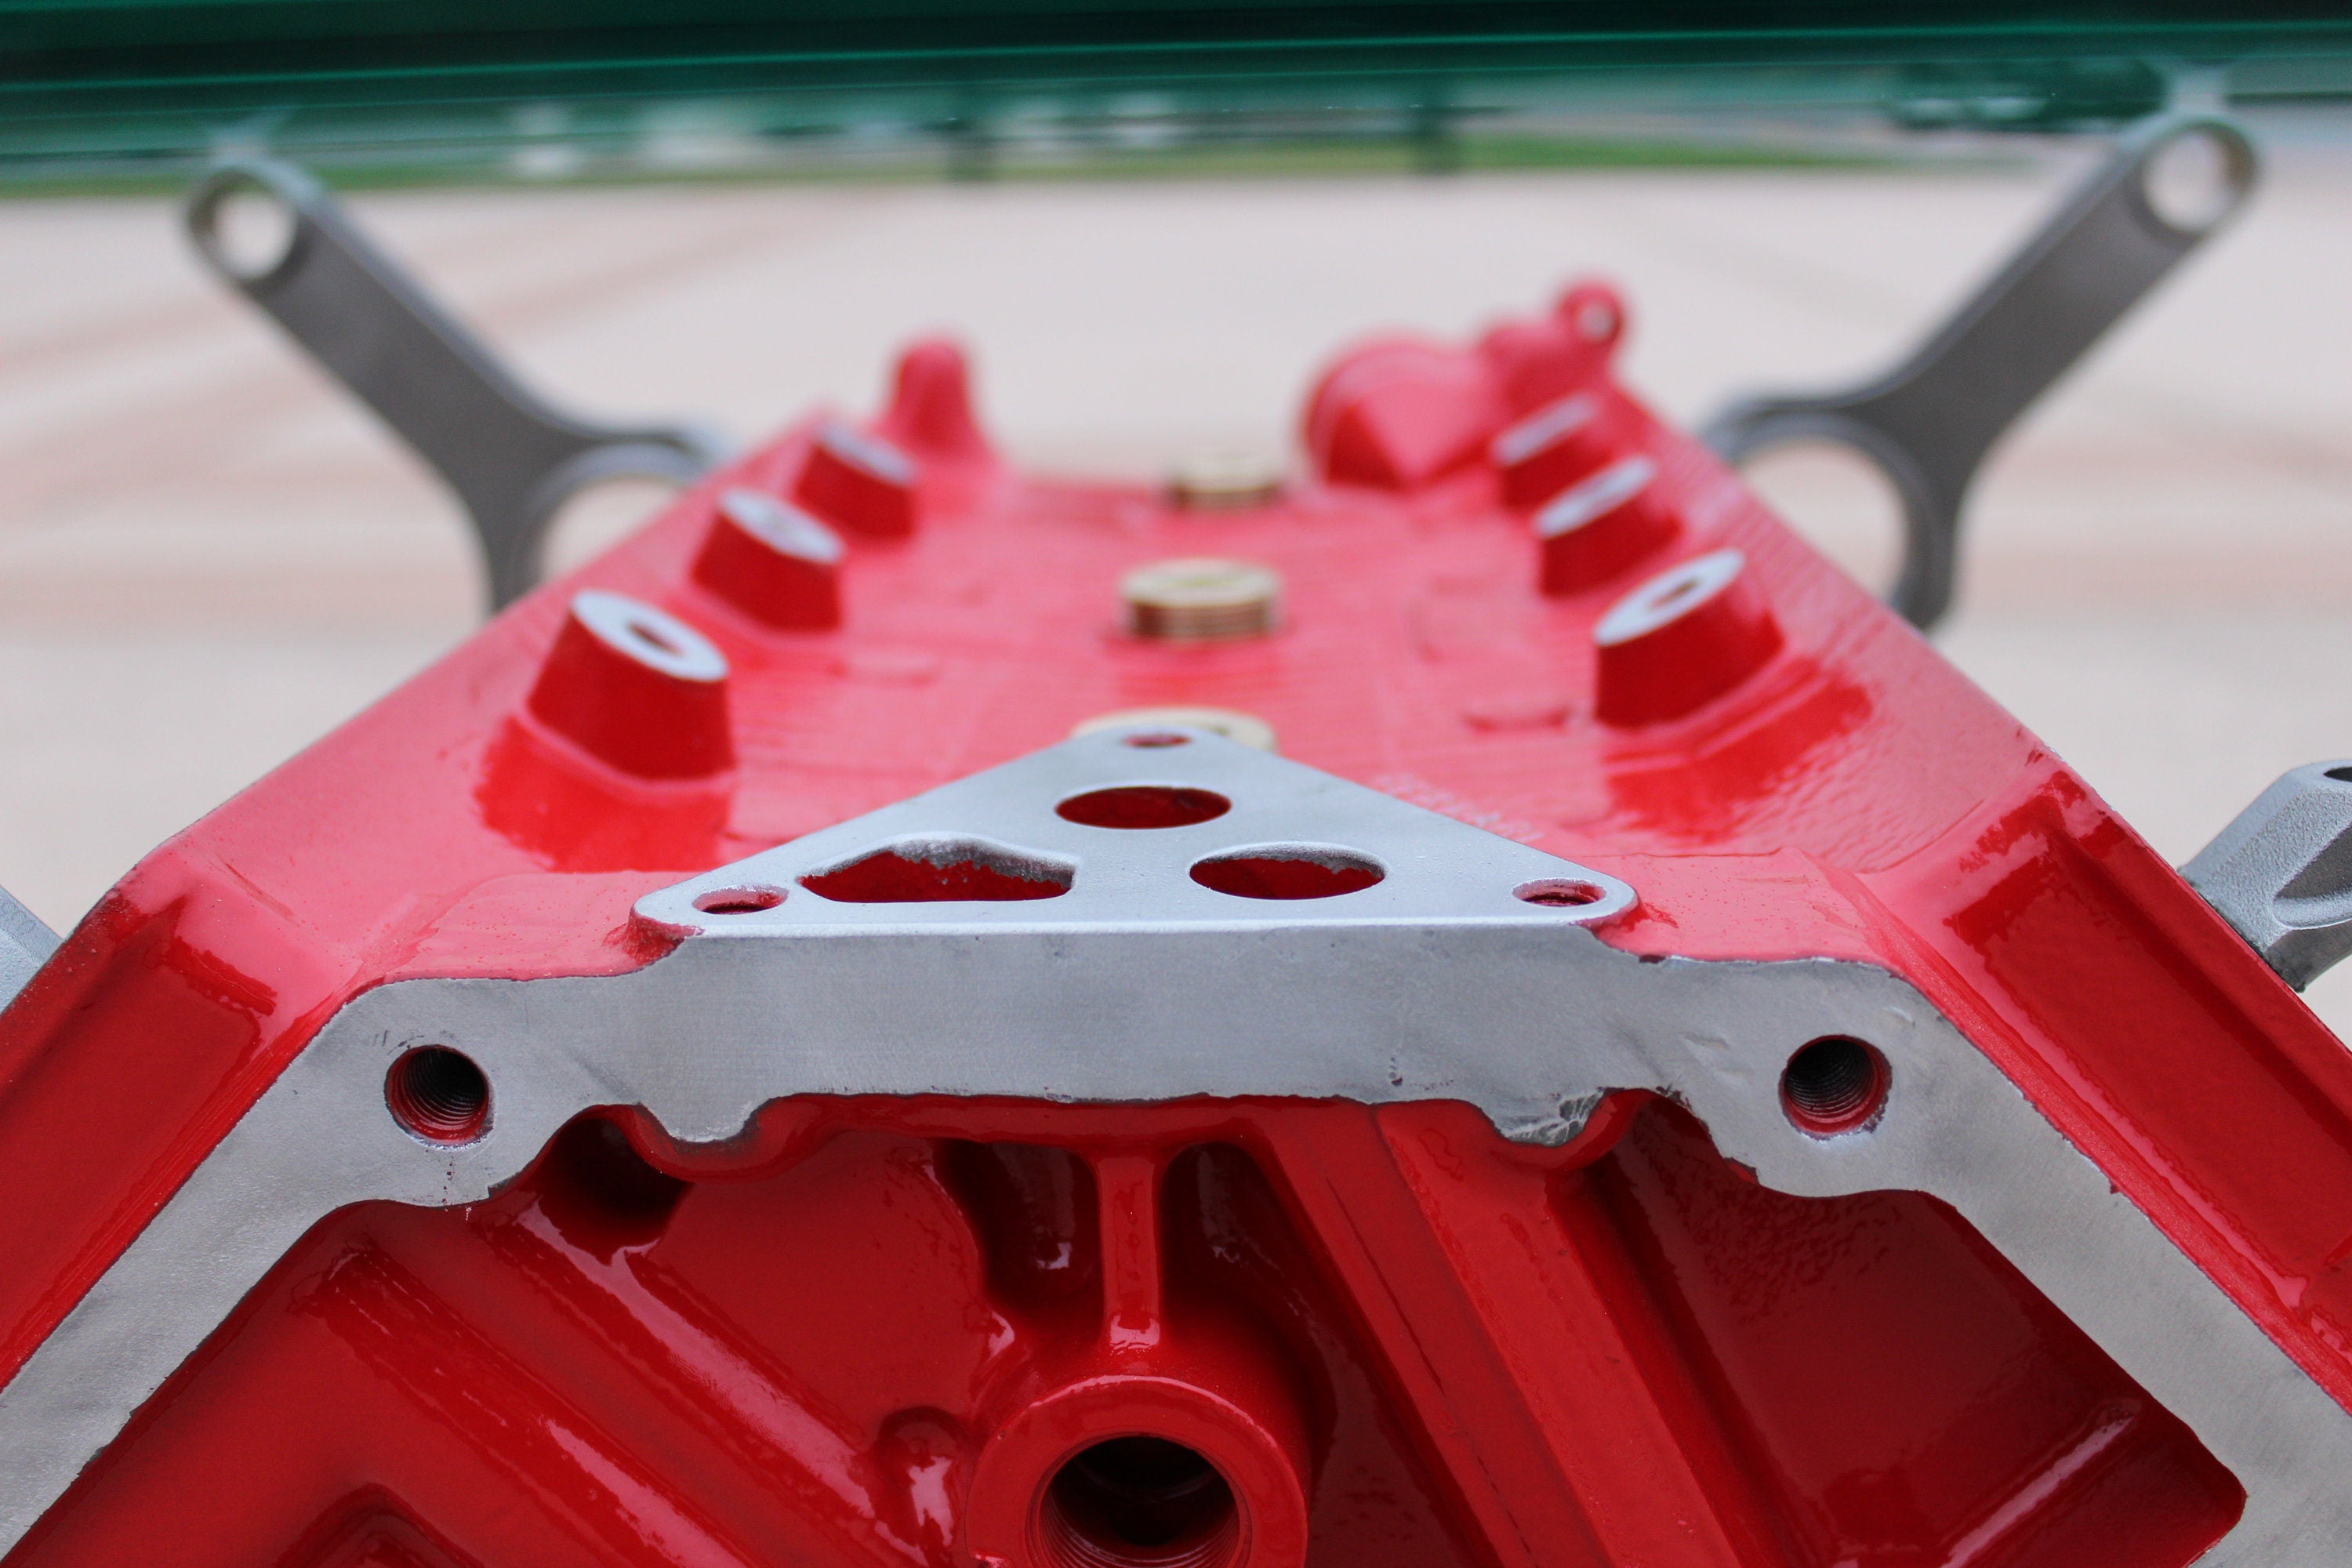 Close-up view of a red engine block coffee table.